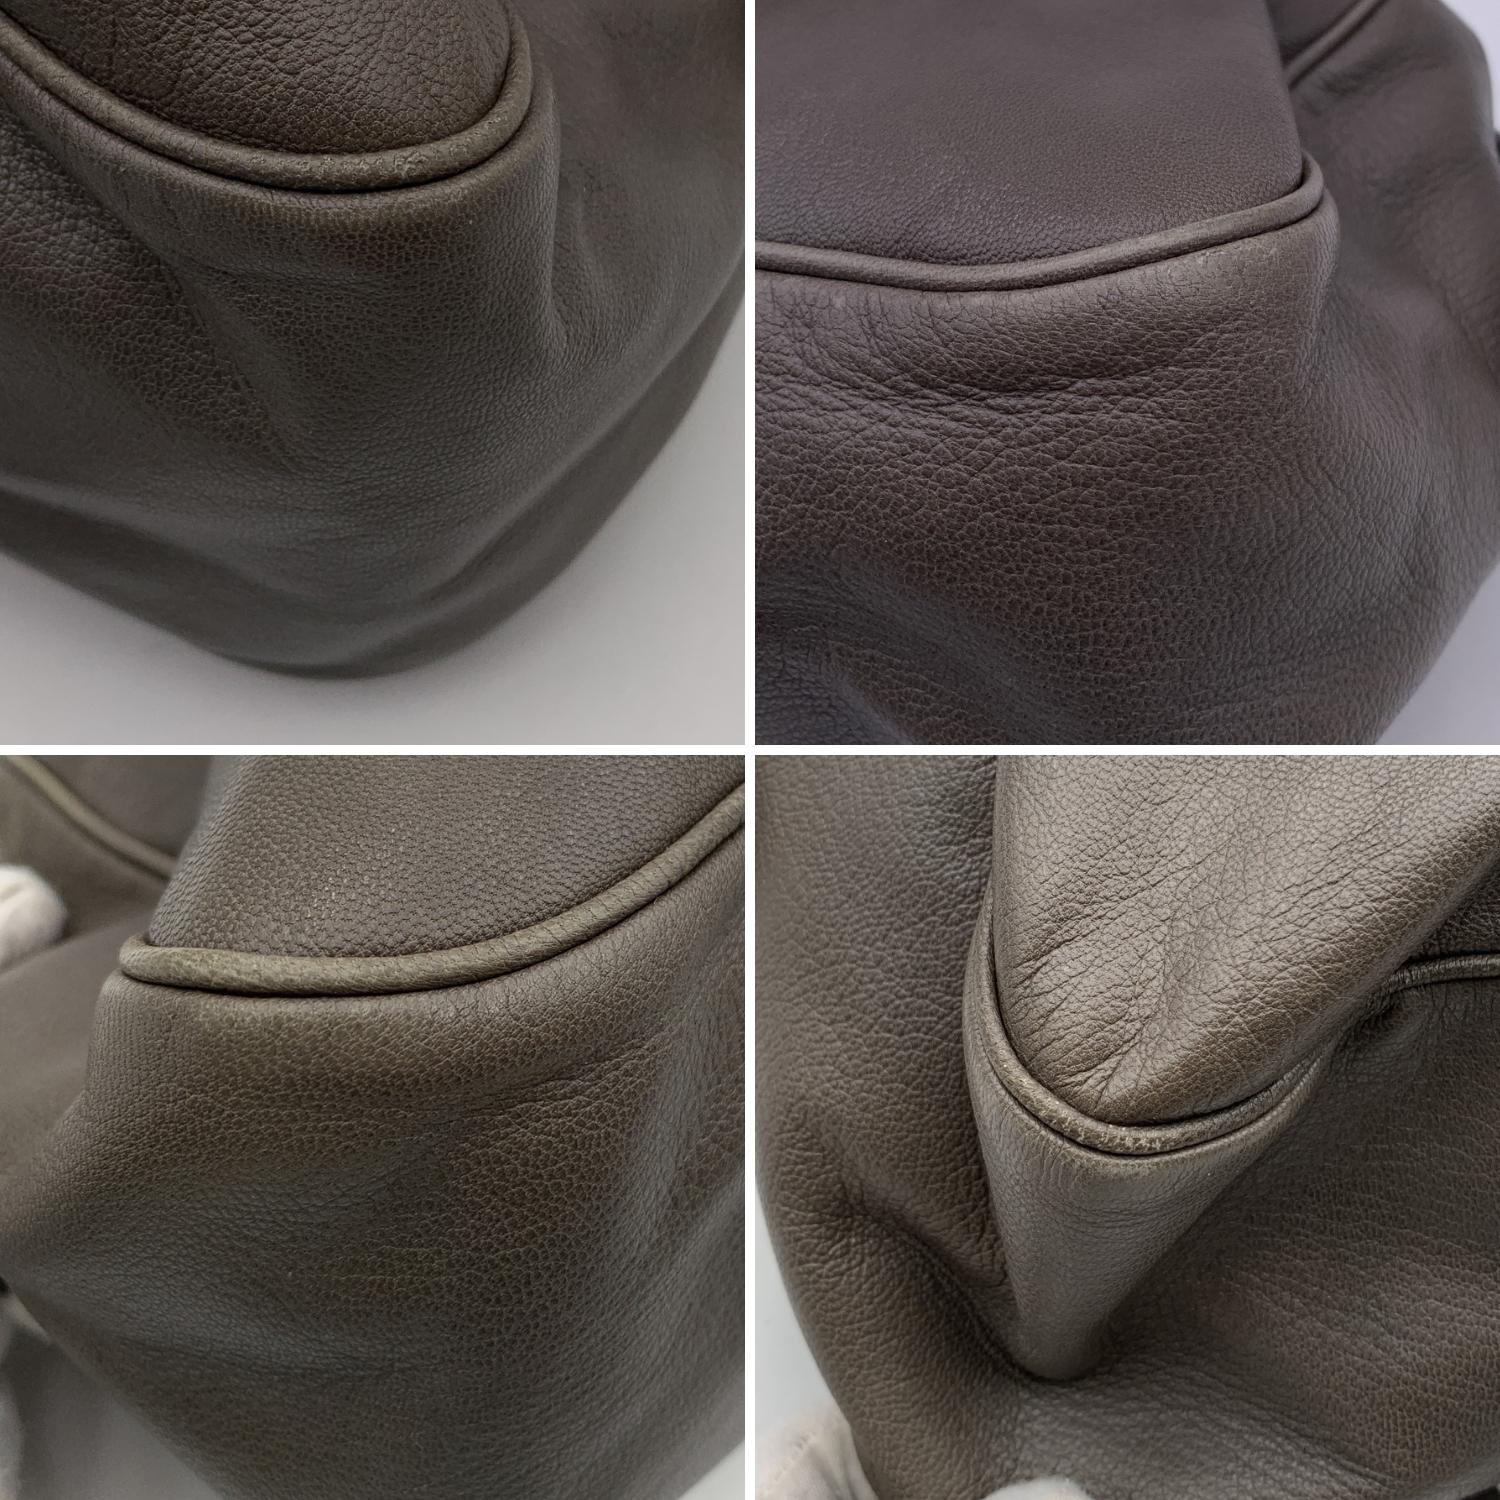 Yves Saint Laurent Grey Taupe Leather Muse Bowler Satchel Bag 1